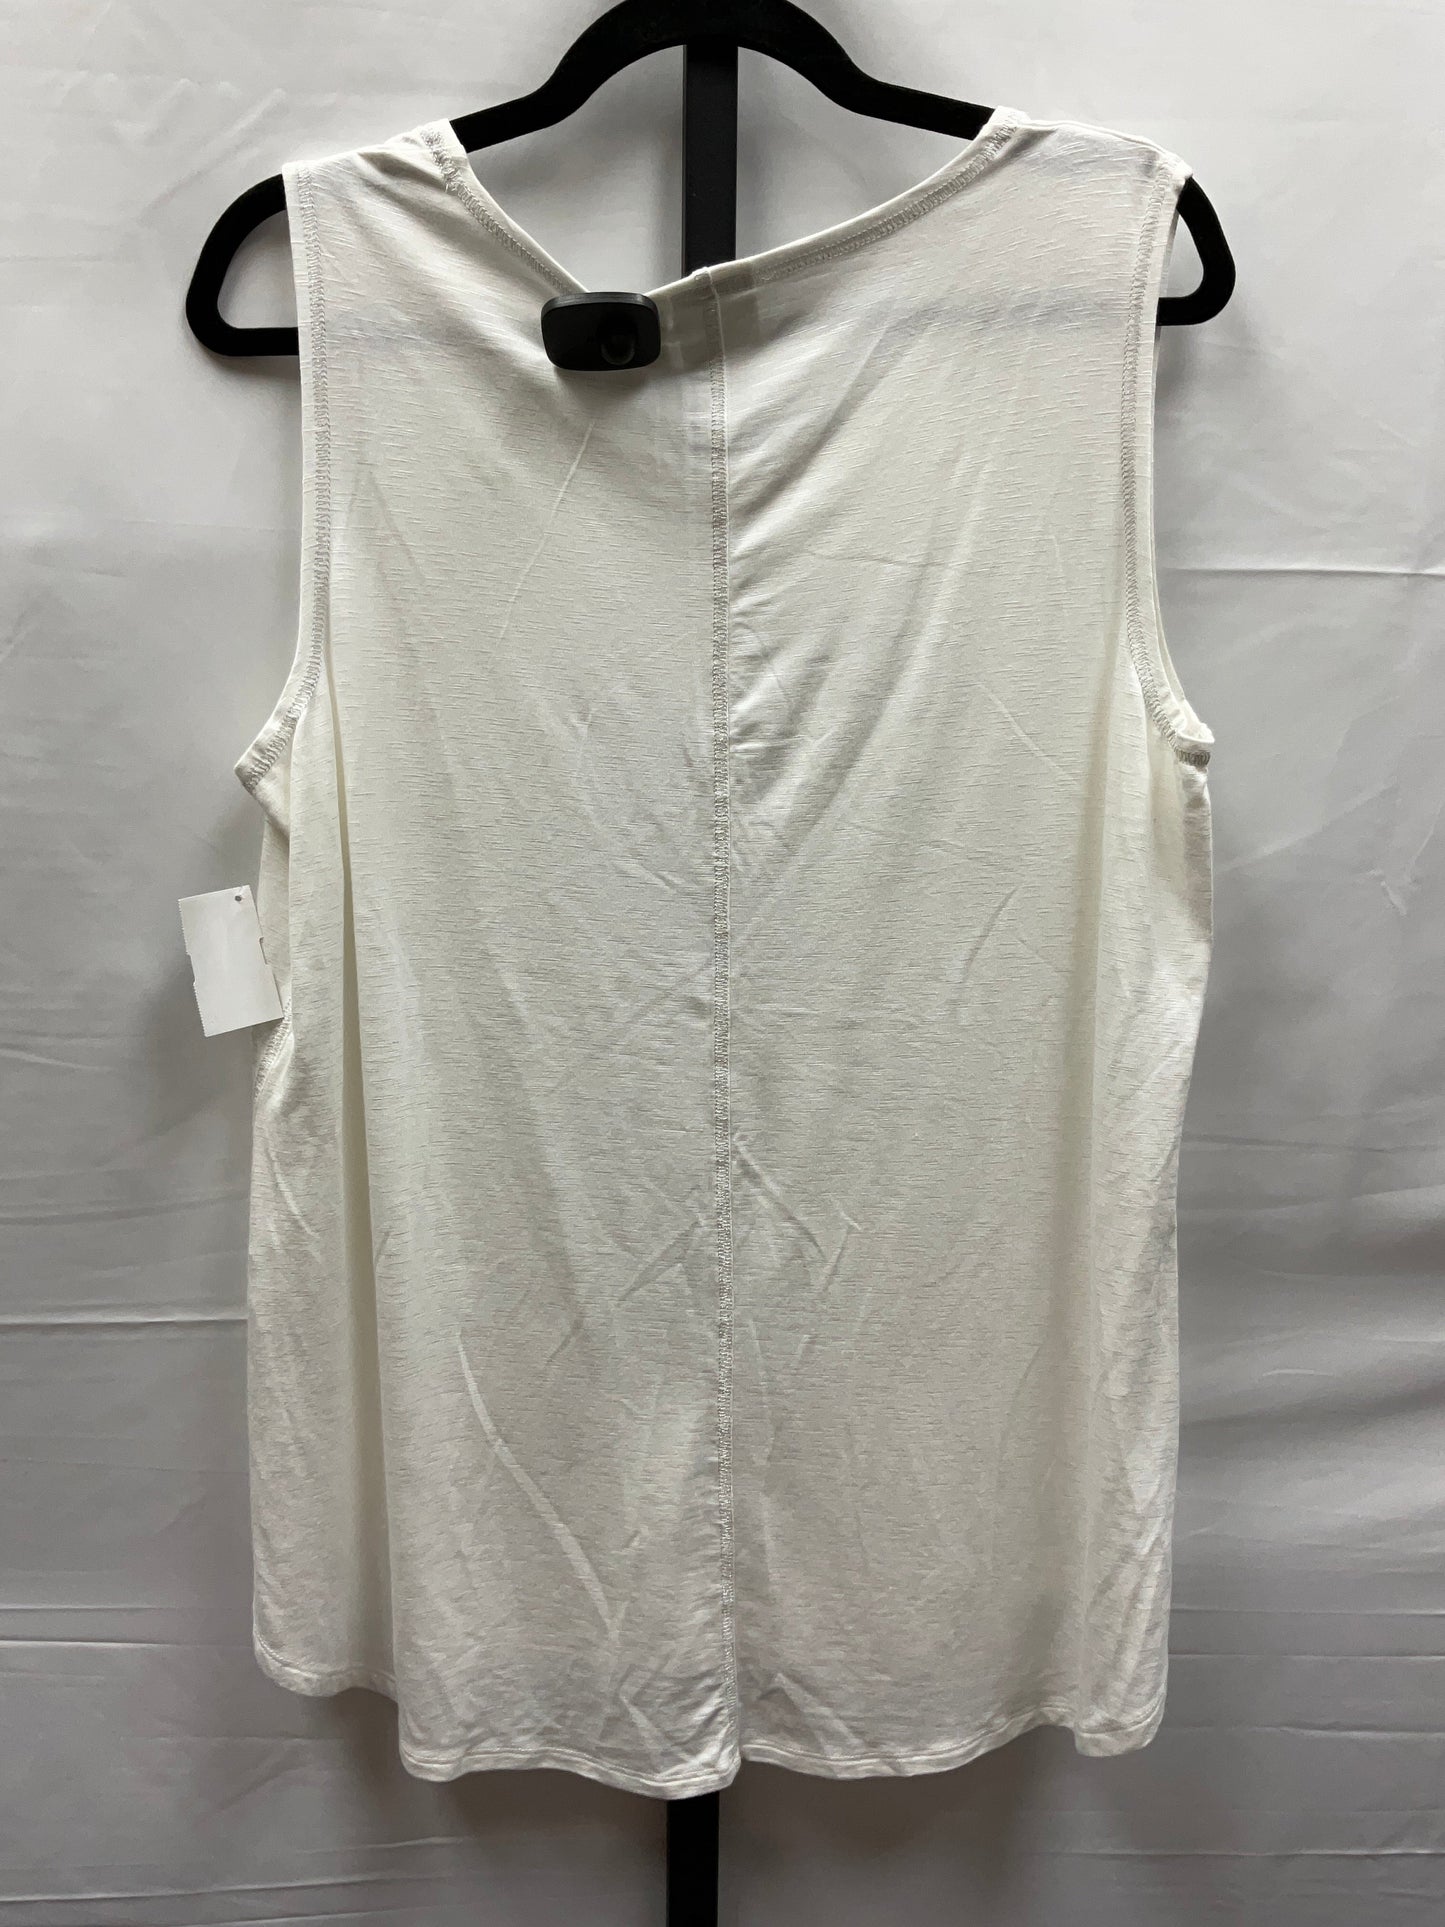 White Top Sleeveless Zenergy By Chicos, Size L